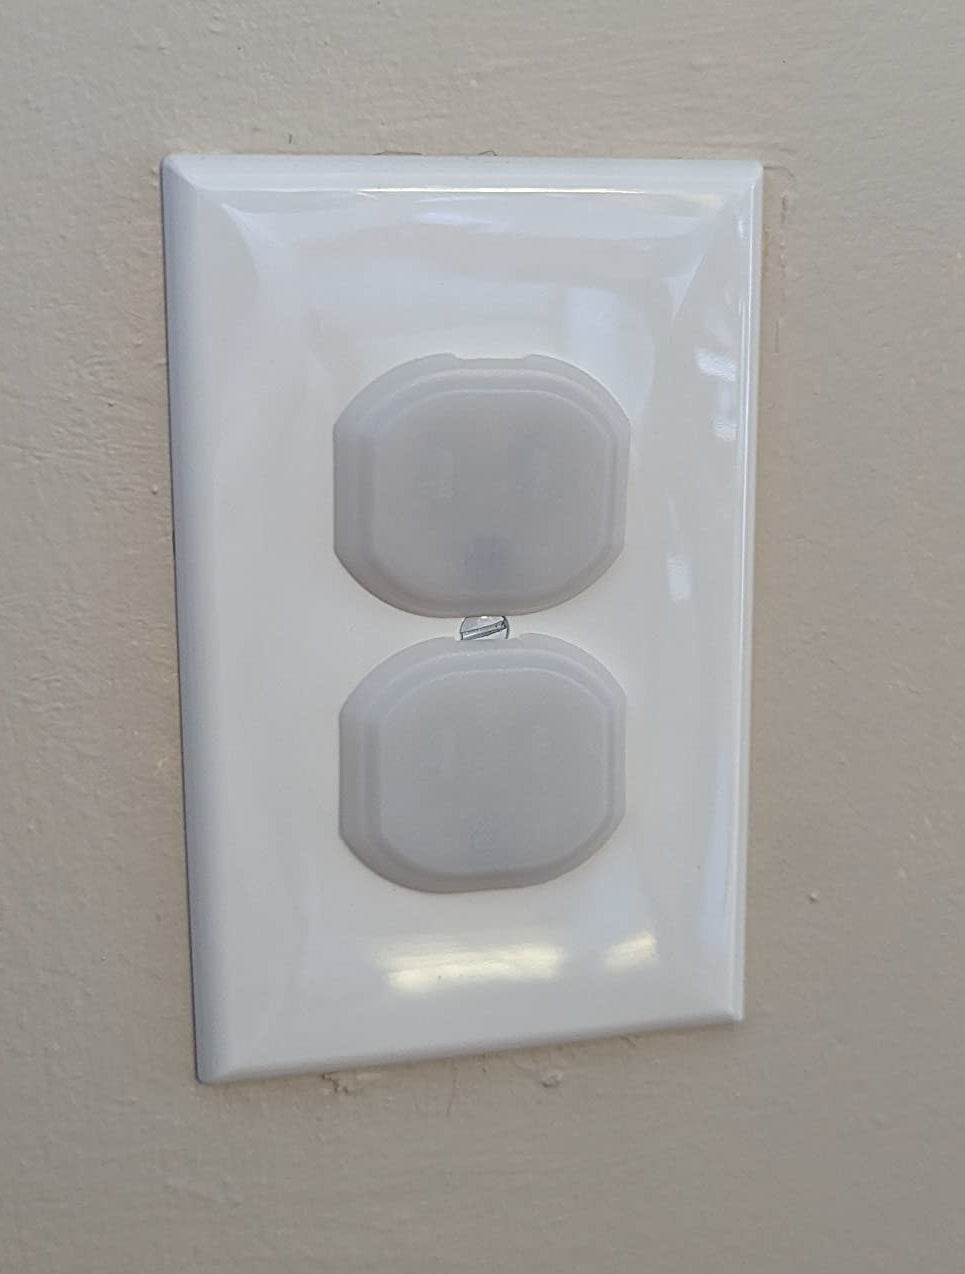 Reviewer&#x27;s photo of plastic plug protectors in outlet